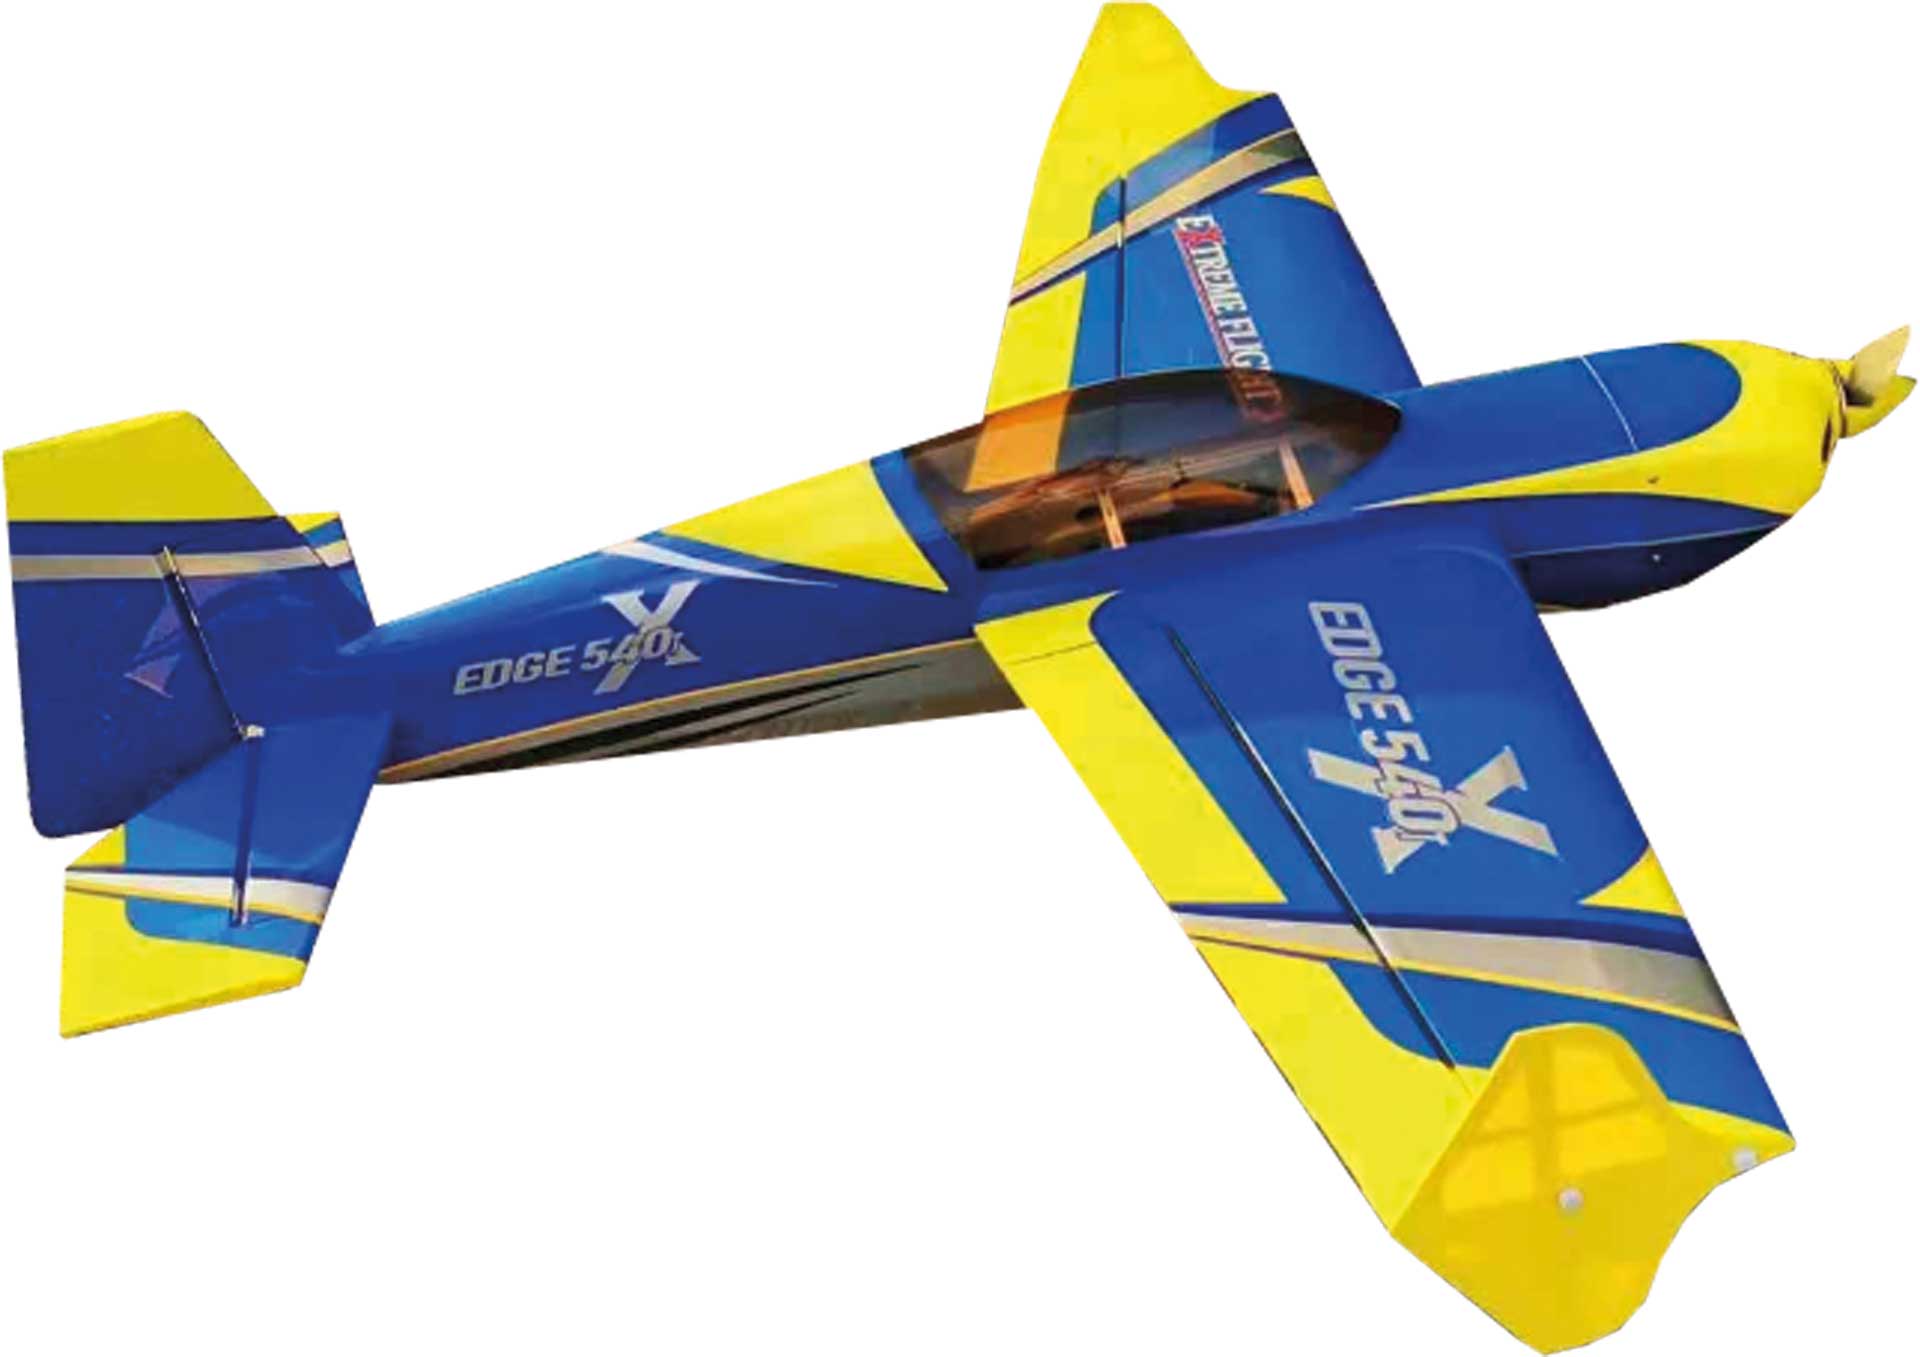 EXTREMEFLIGHT-RC Edge 540 48" V2 Plus blue/yellow ARF with quick release wing latching mechanism